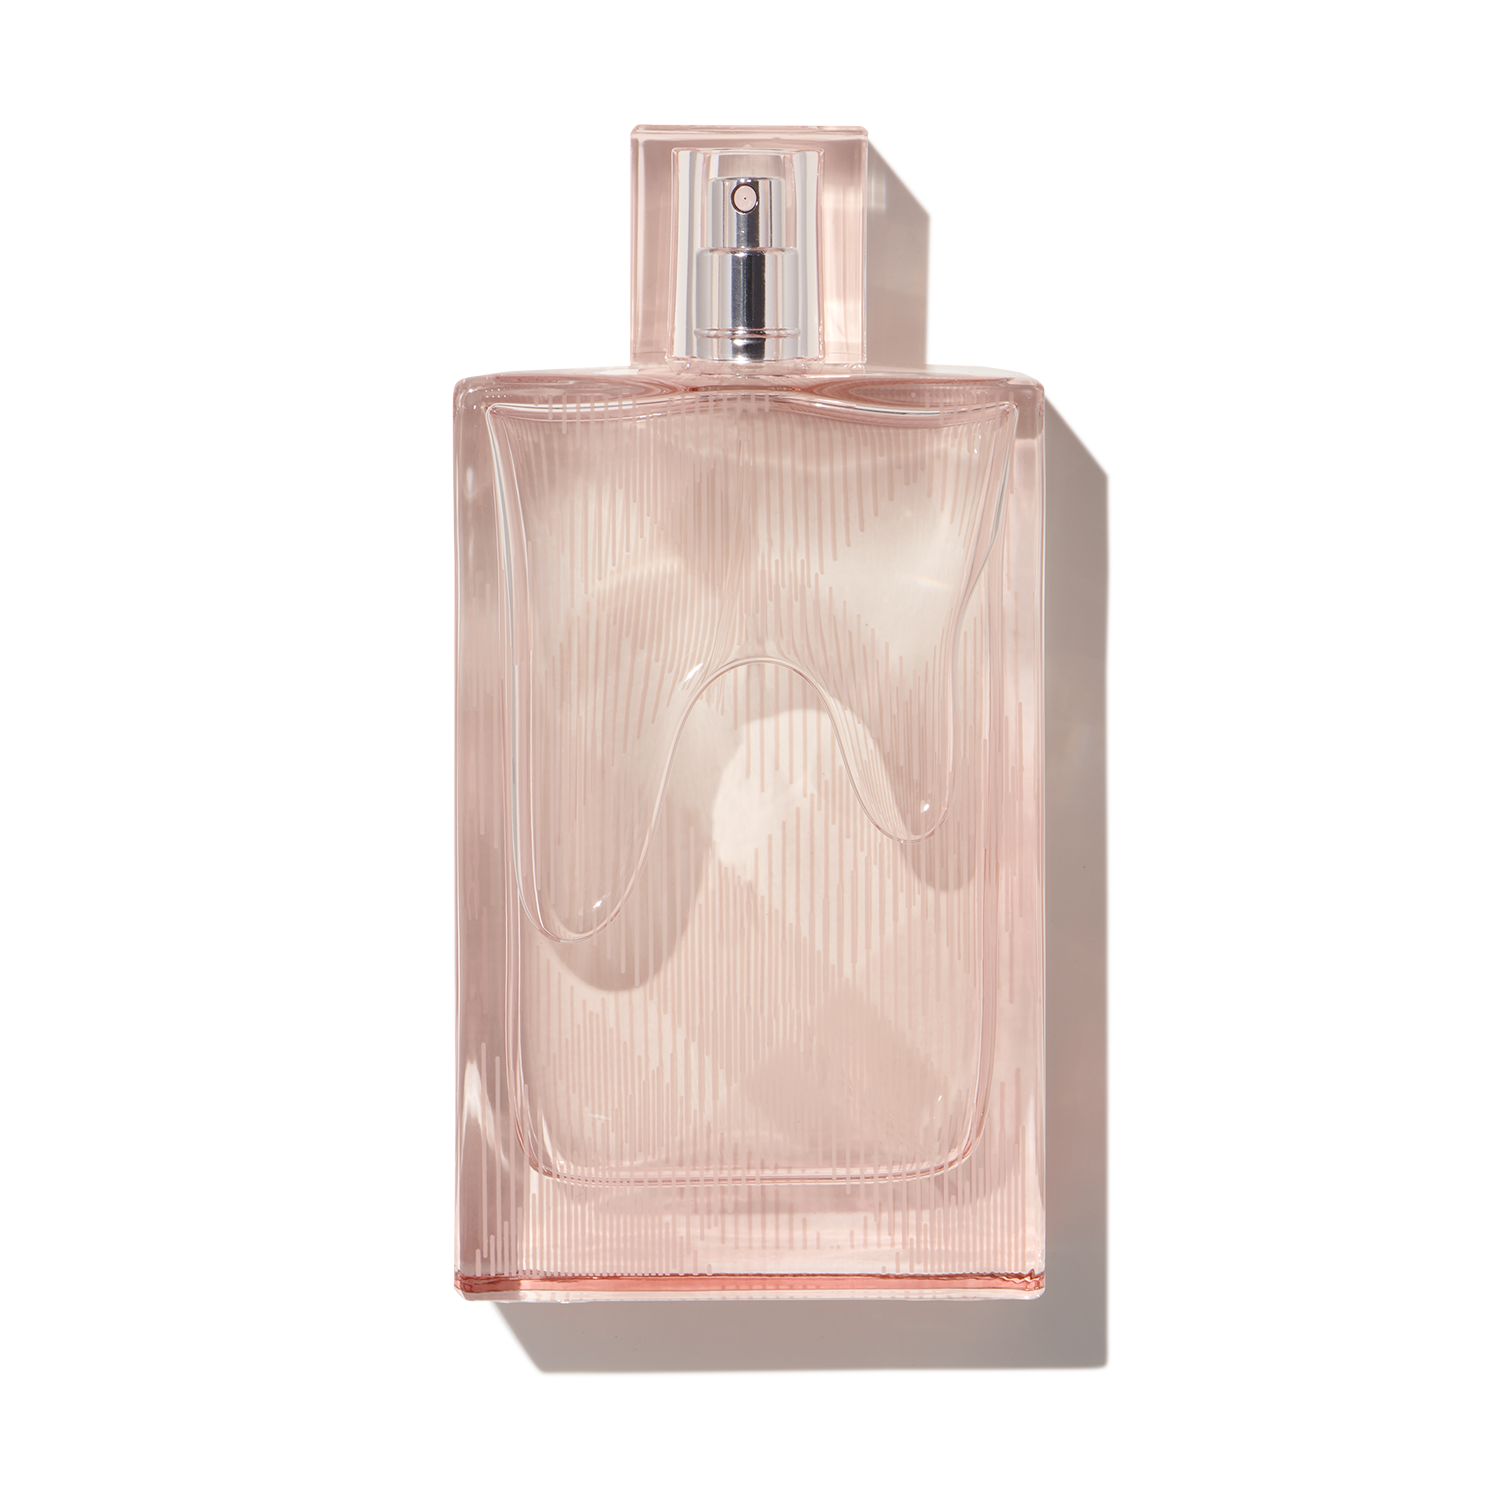 Get Burberry Brit Sheer for Scentbird at $16.95